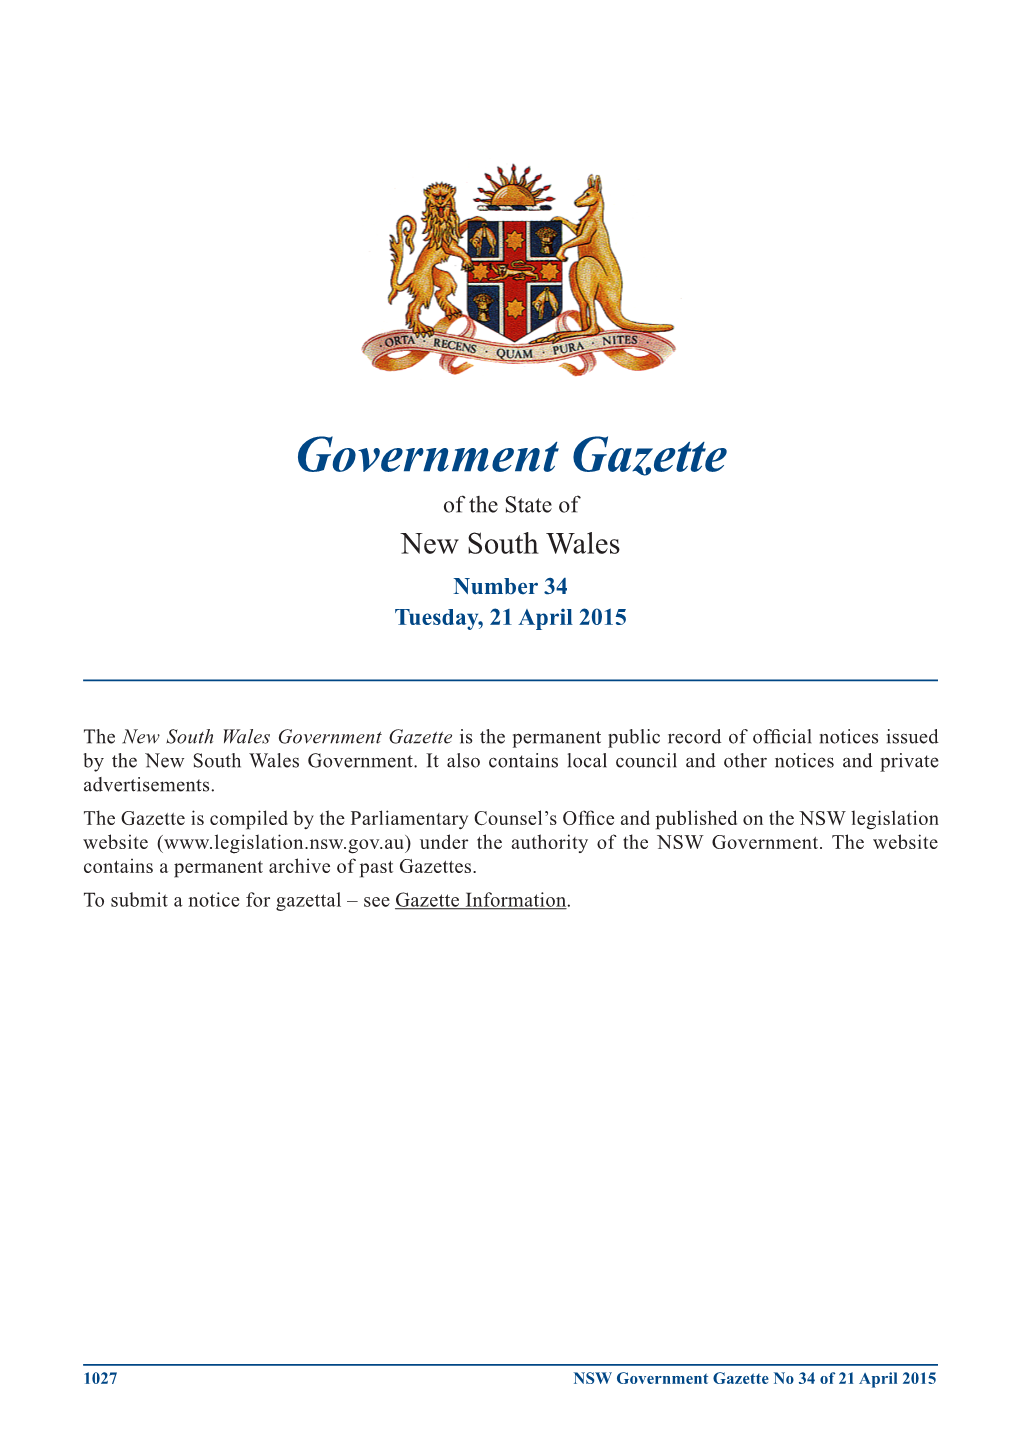 Government Gazette of the State of New South Wales Number 34 Tuesday, 21 April 2015